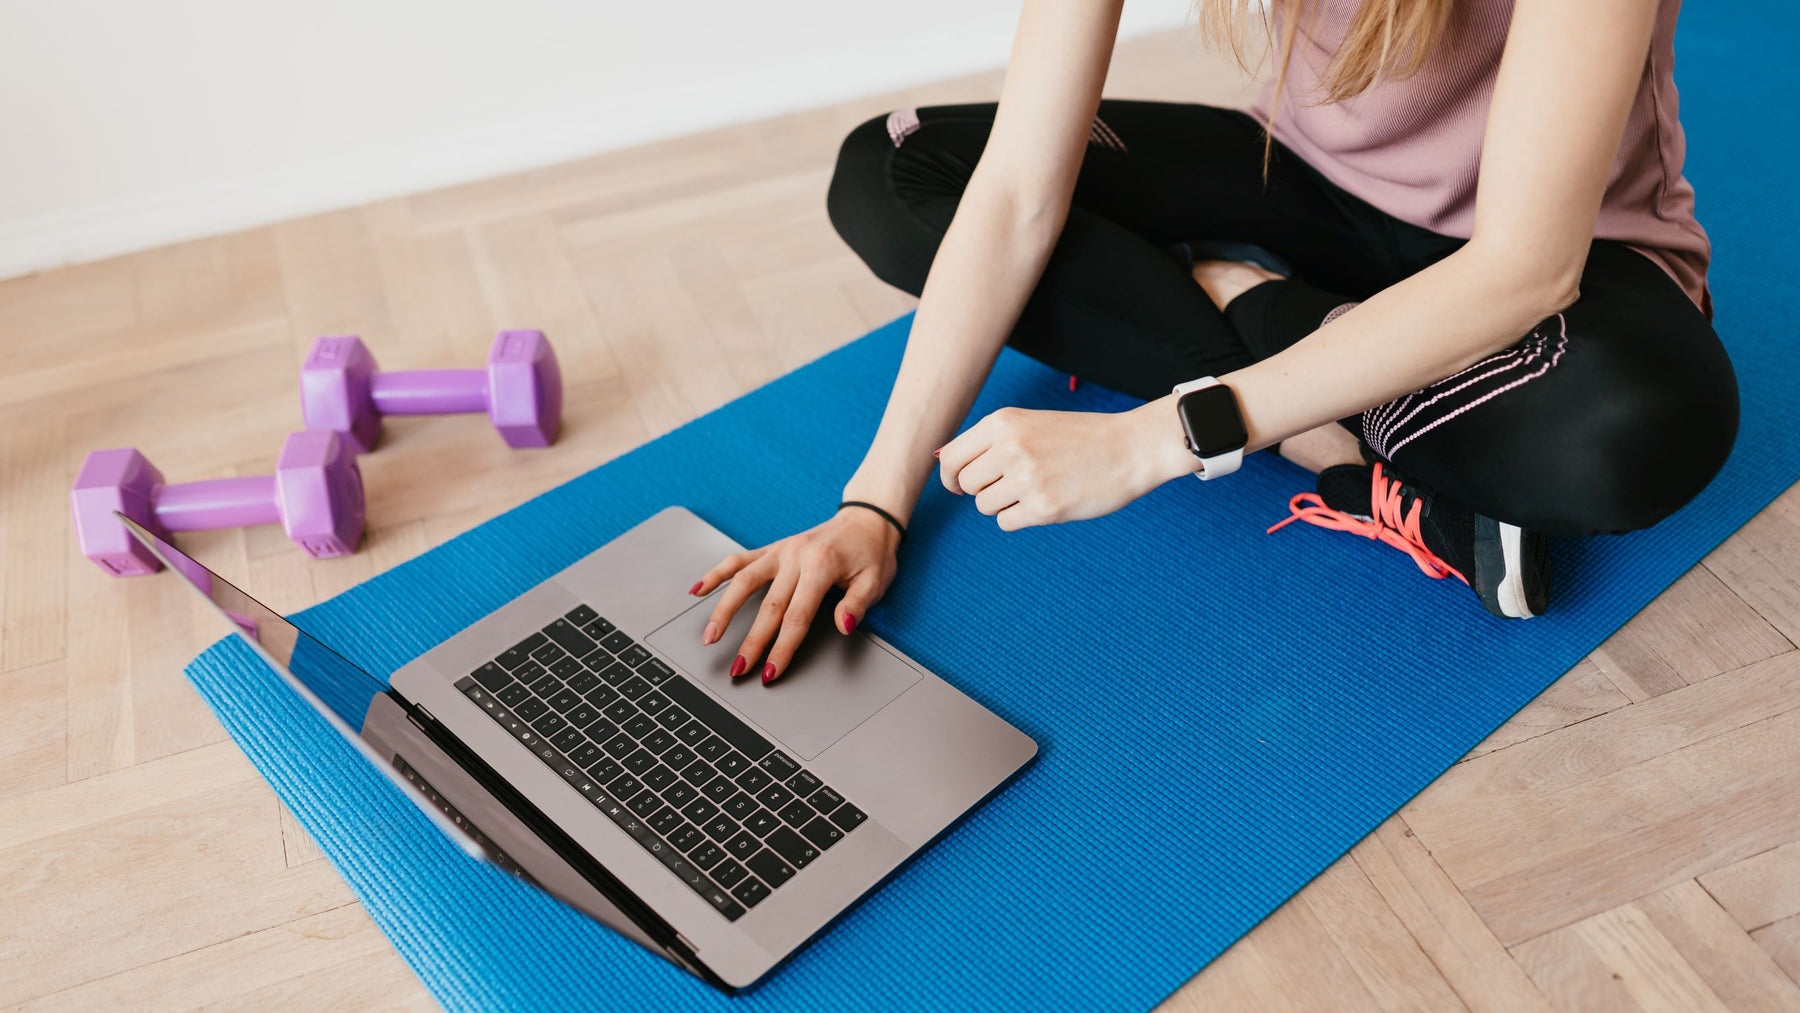 Woman using an Apple Macbook laptop while working out